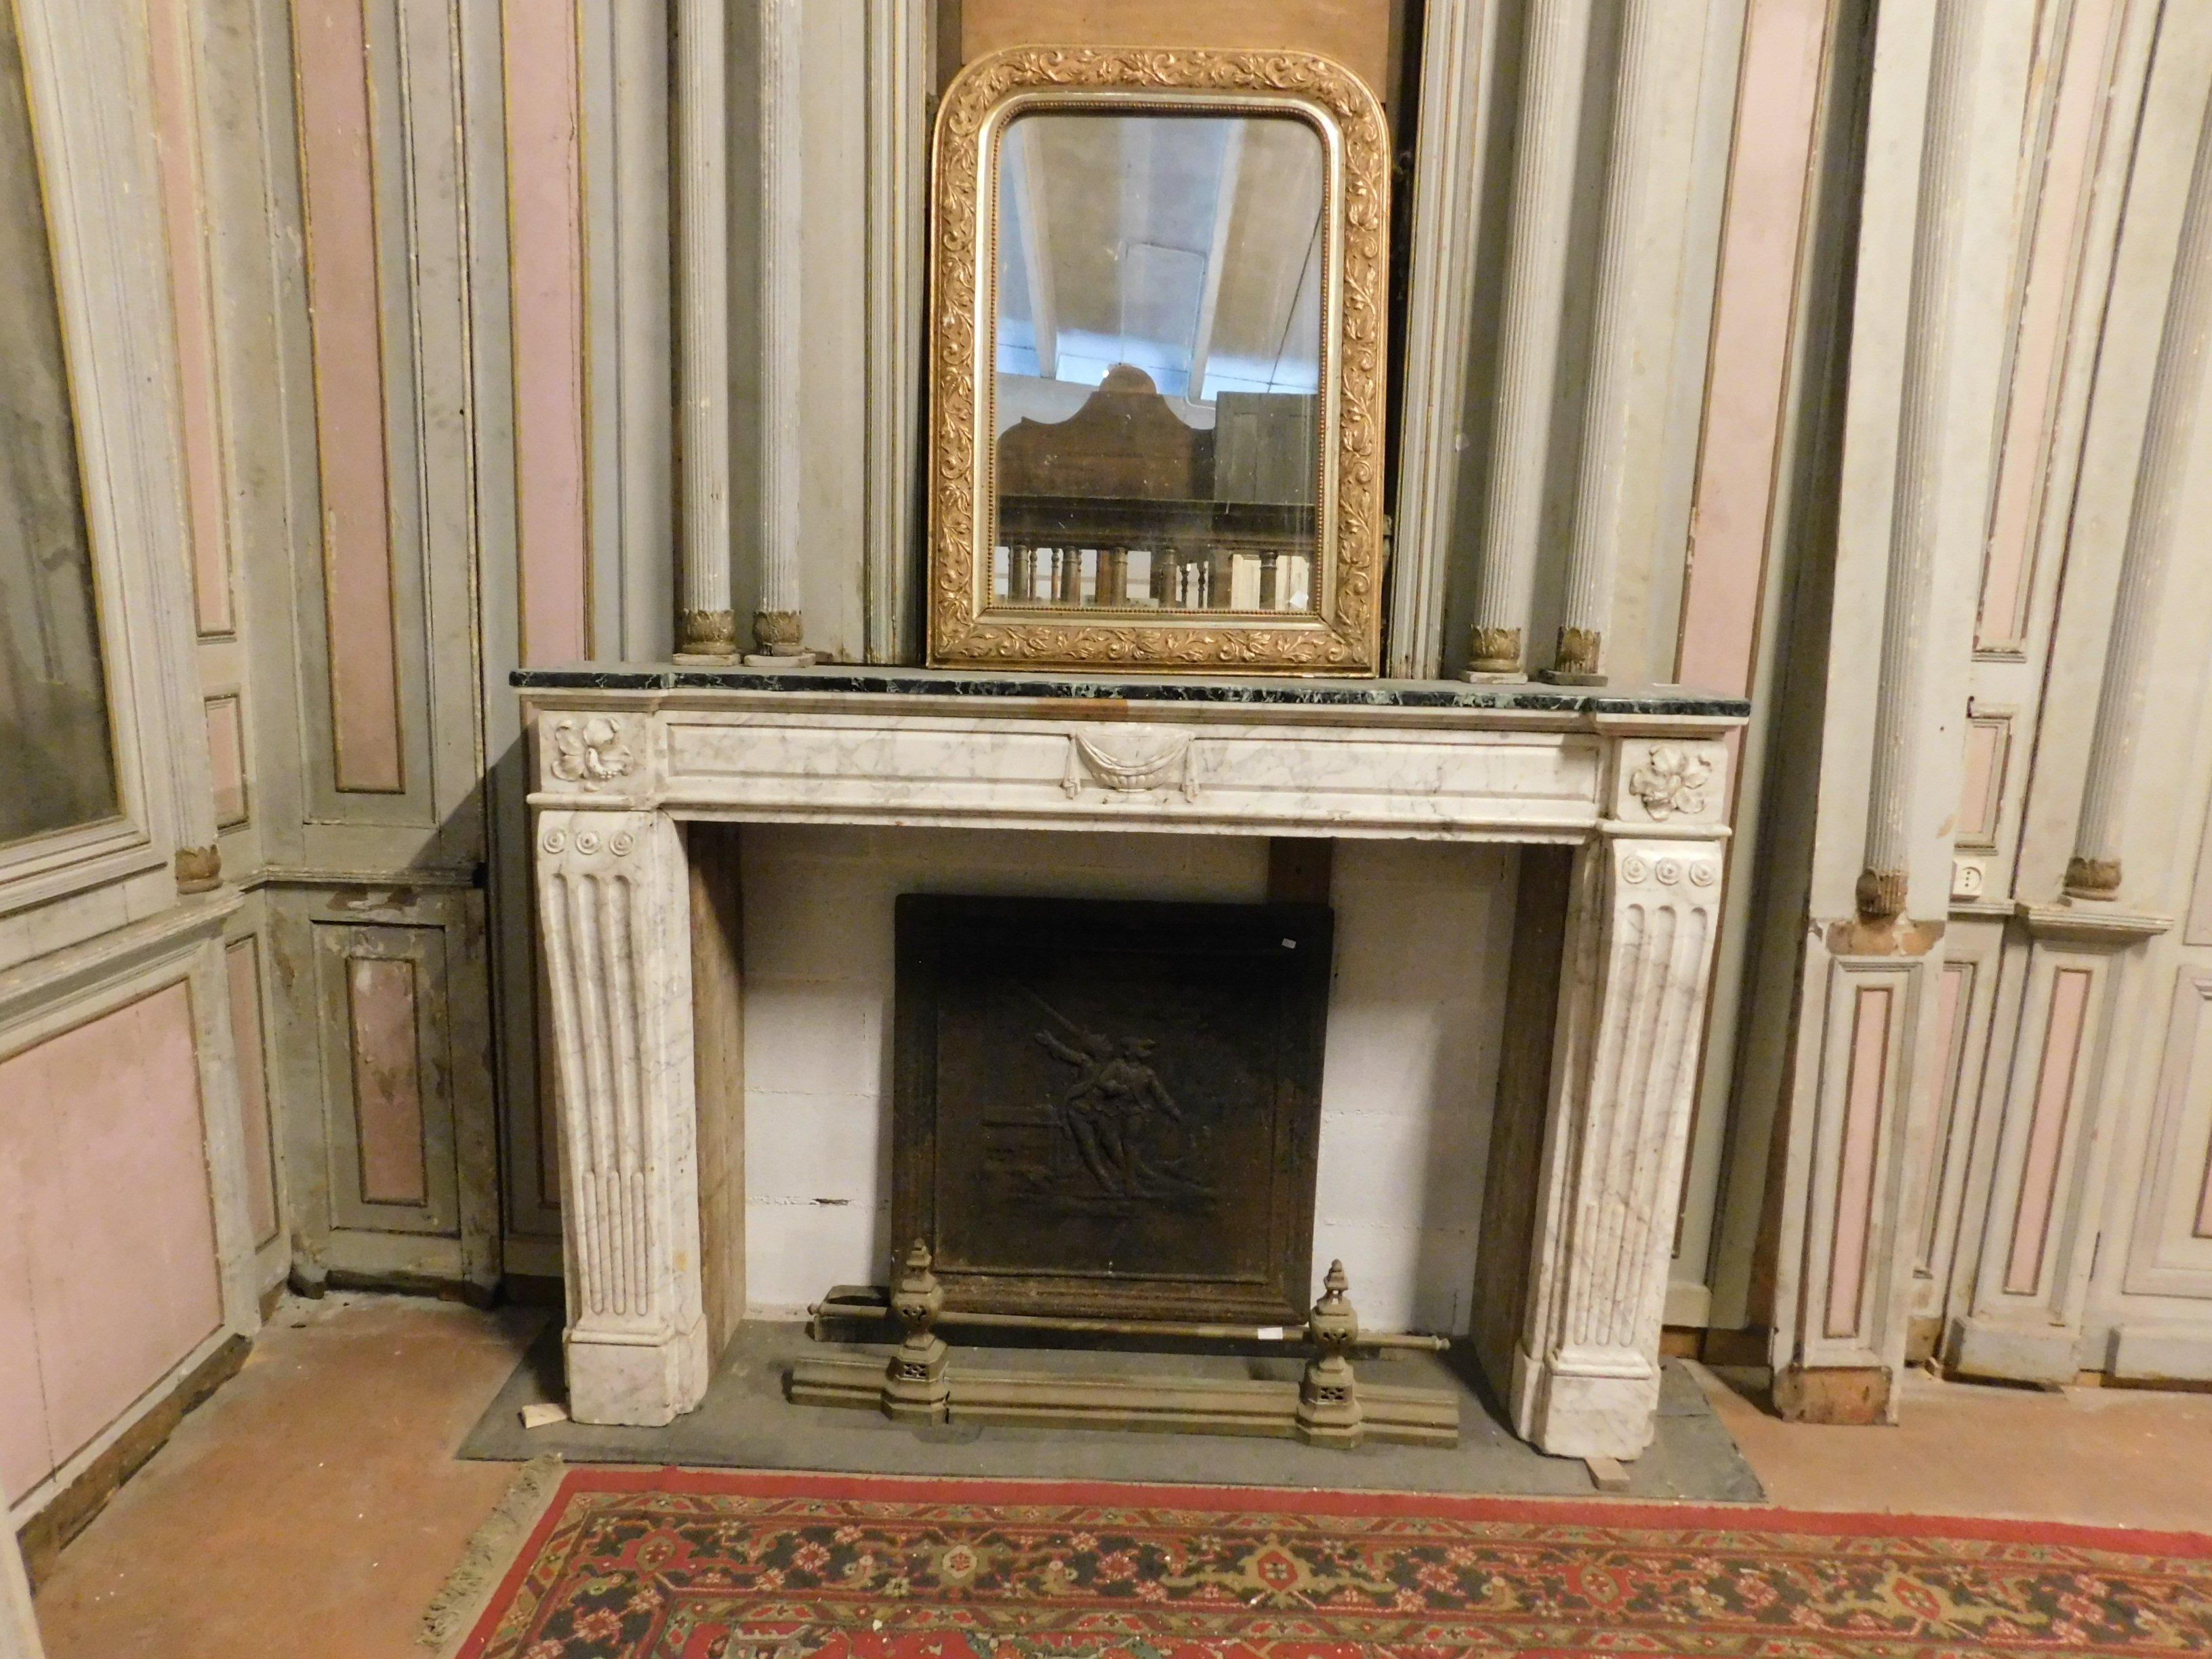 Ancient mantel (fireplace) fireplace in style and epoch Louis XVI, built in the late eighteenth century in France, by craftsman who carved fine marbles such as white Carrara and green alps marble that can be seen in the upper floor of the shelf.